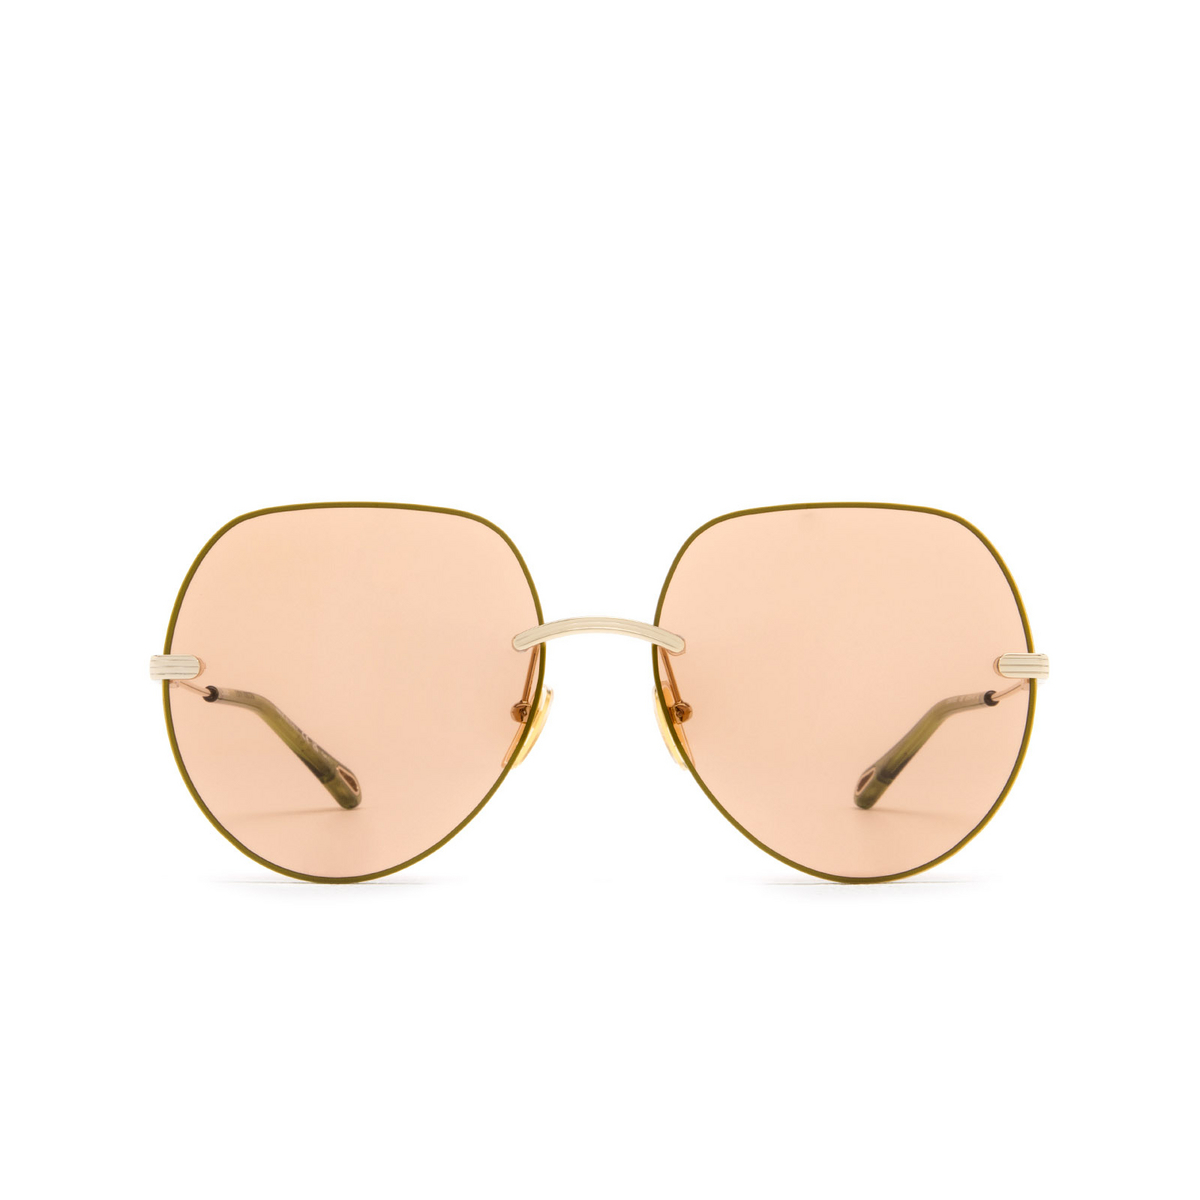 Chloé Benjamine round Sunglasses 008 Gold - front view